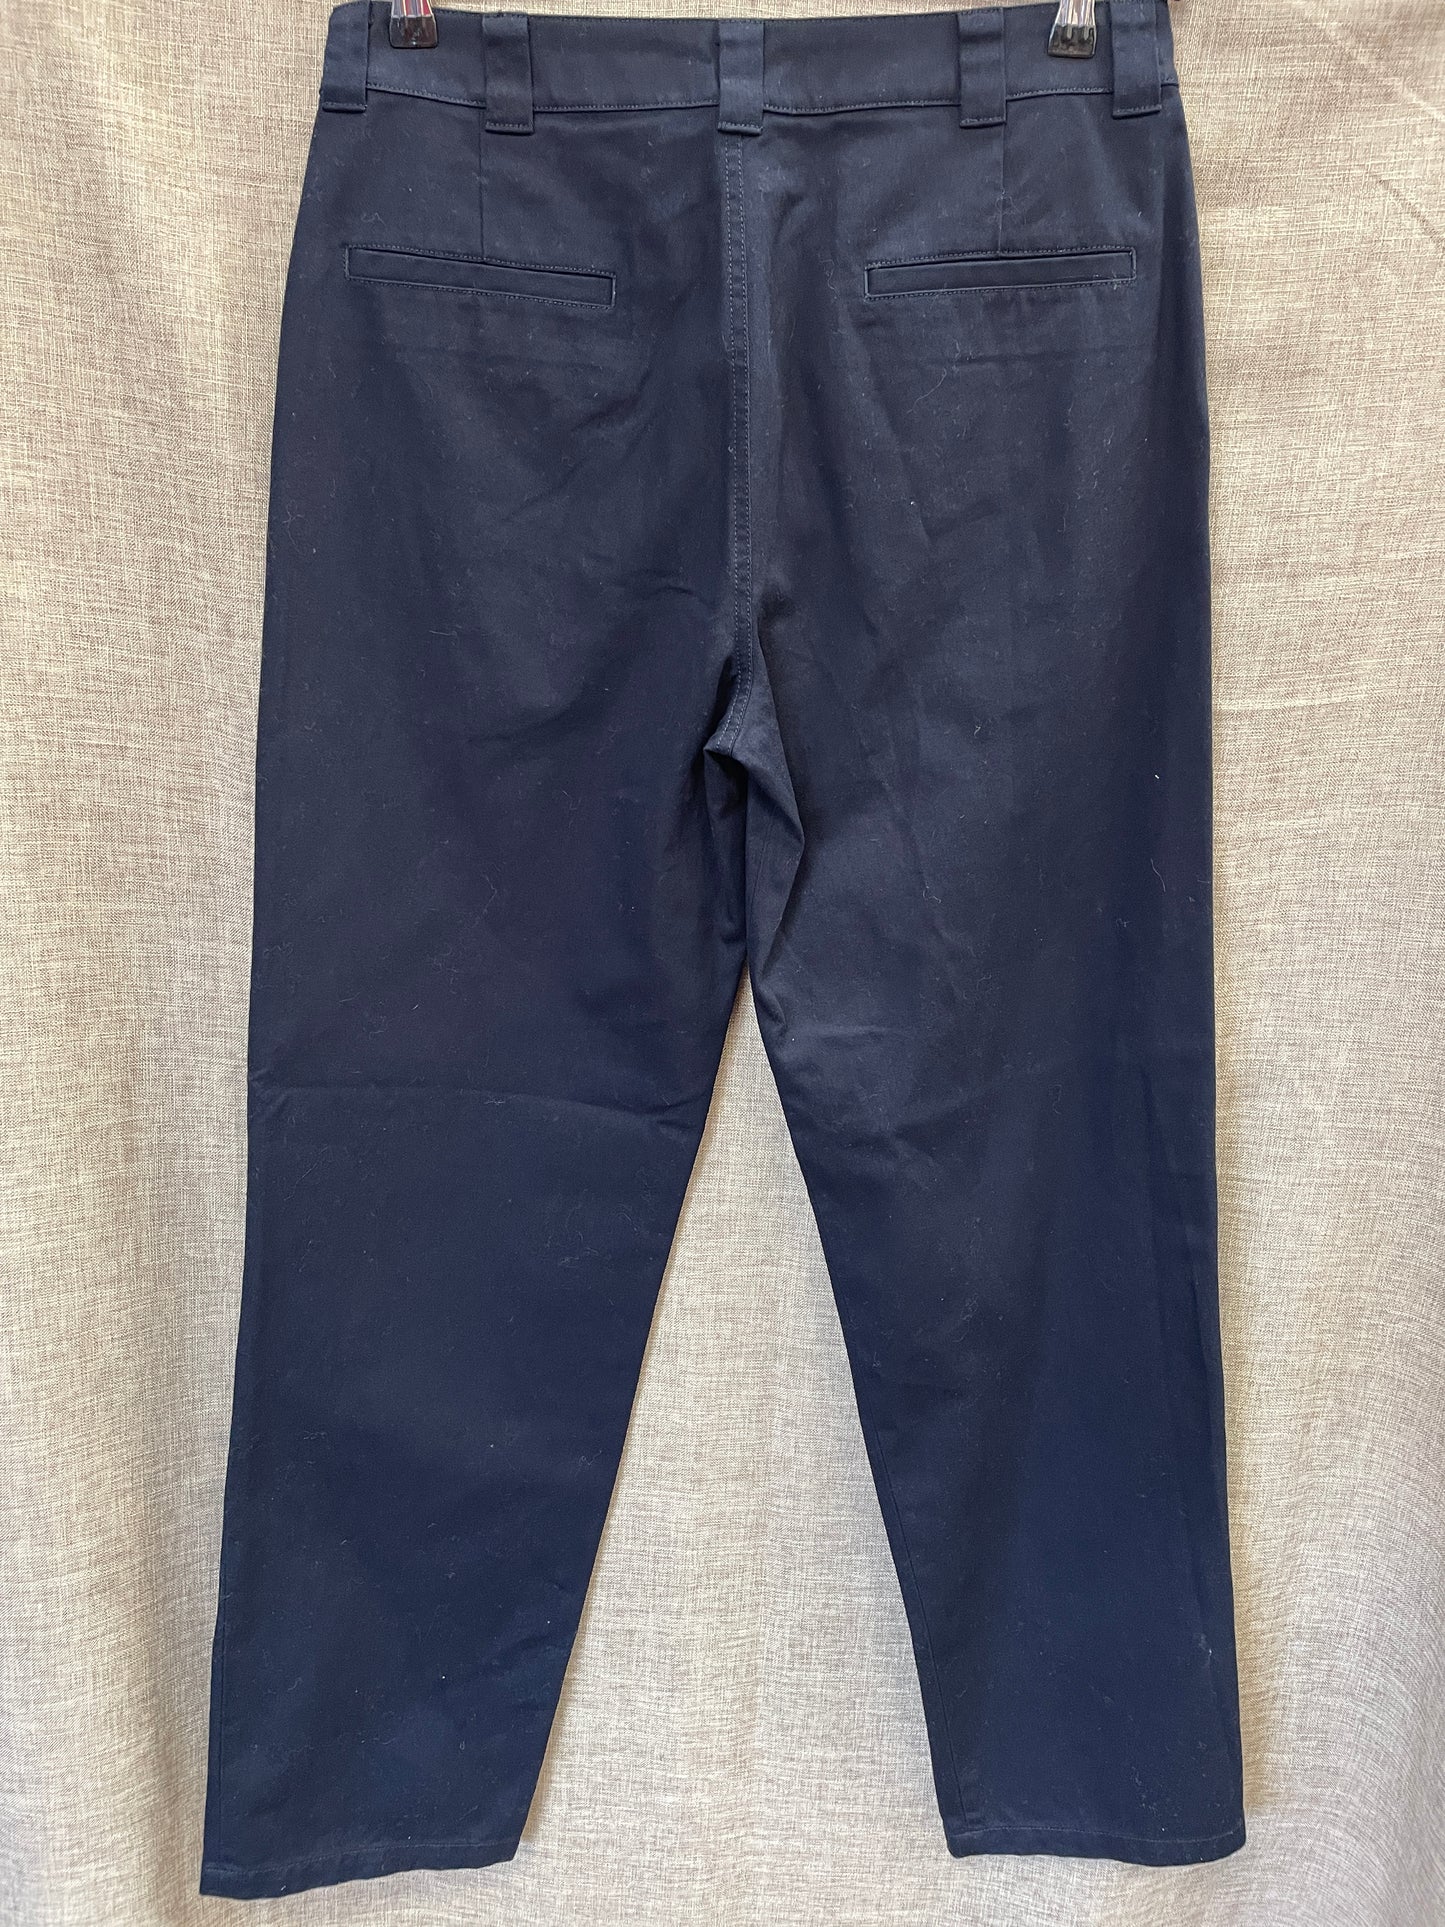 New with Tags Arket Navy Blue Cotton Straight Leg Trousers EU 46 Small